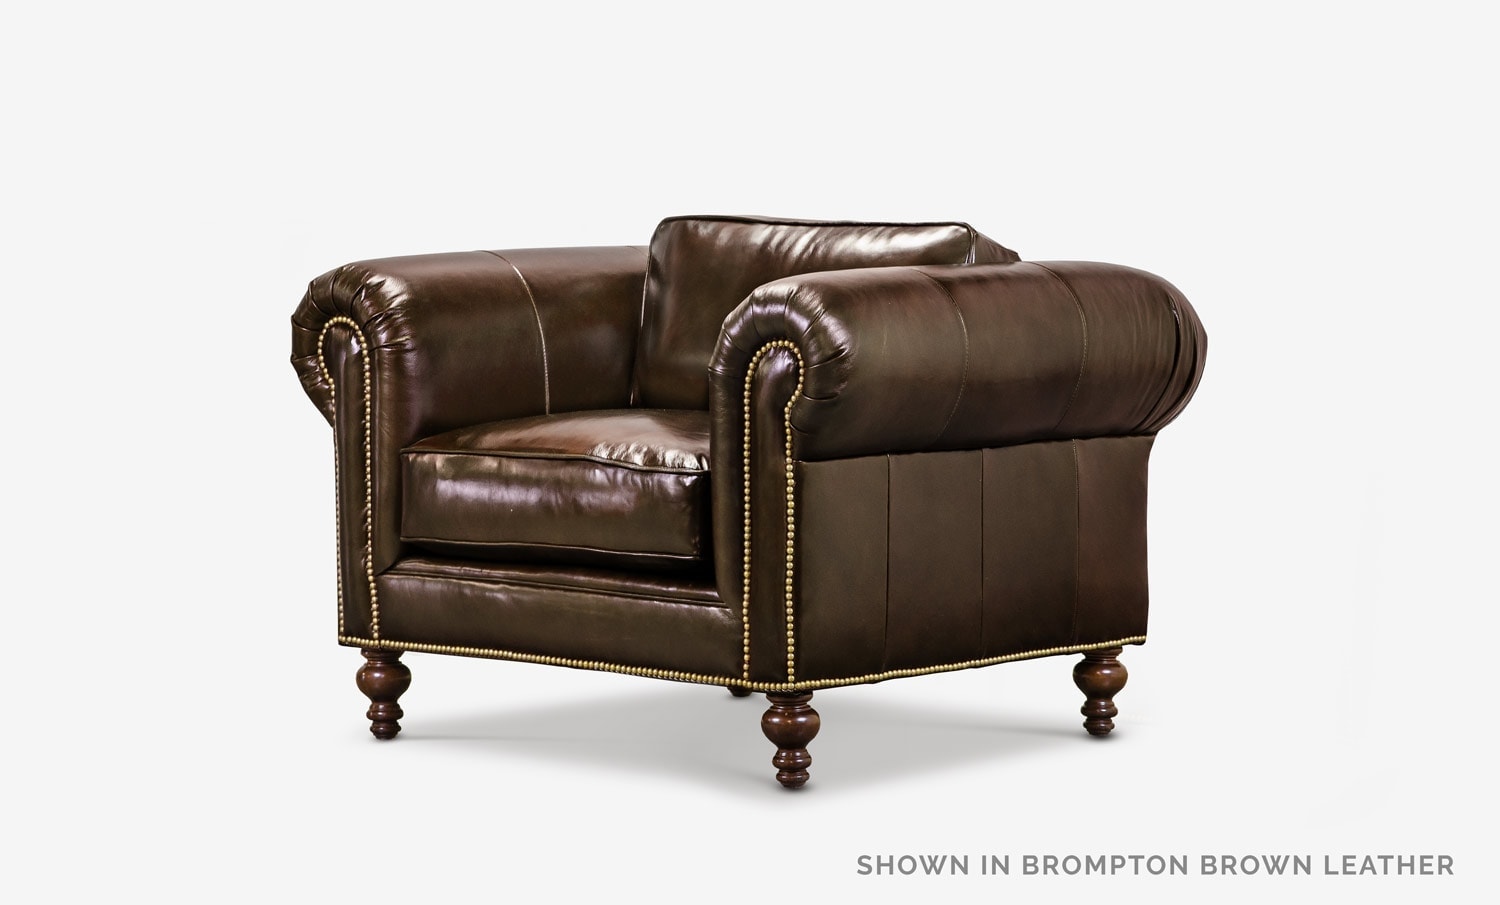 The Sidney: Modern Chesterfield Chair in Brompton Brown Leather